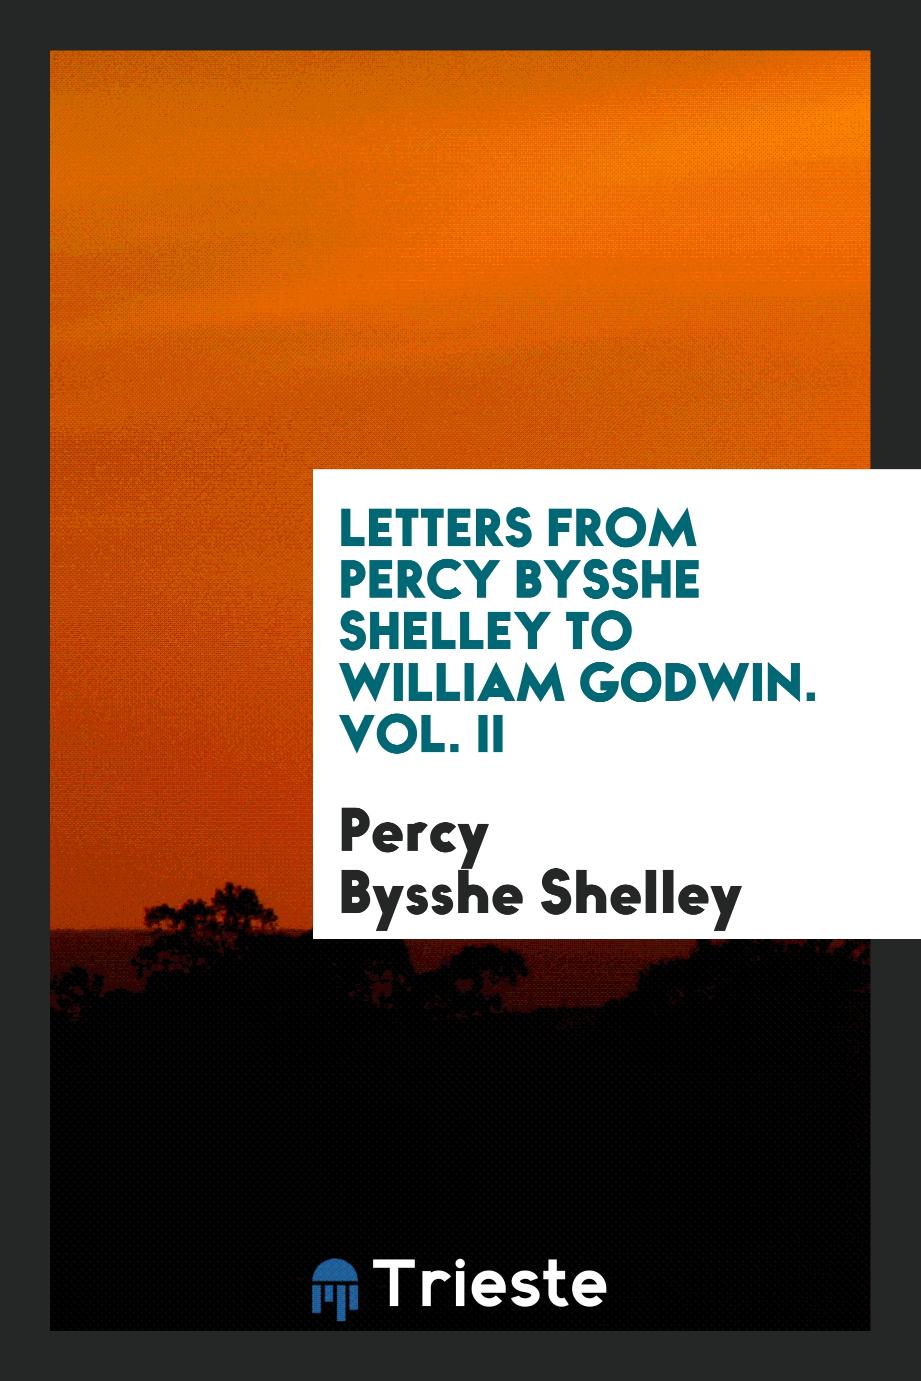 Letters from Percy Bysshe Shelley to William Godwin. Vol. II